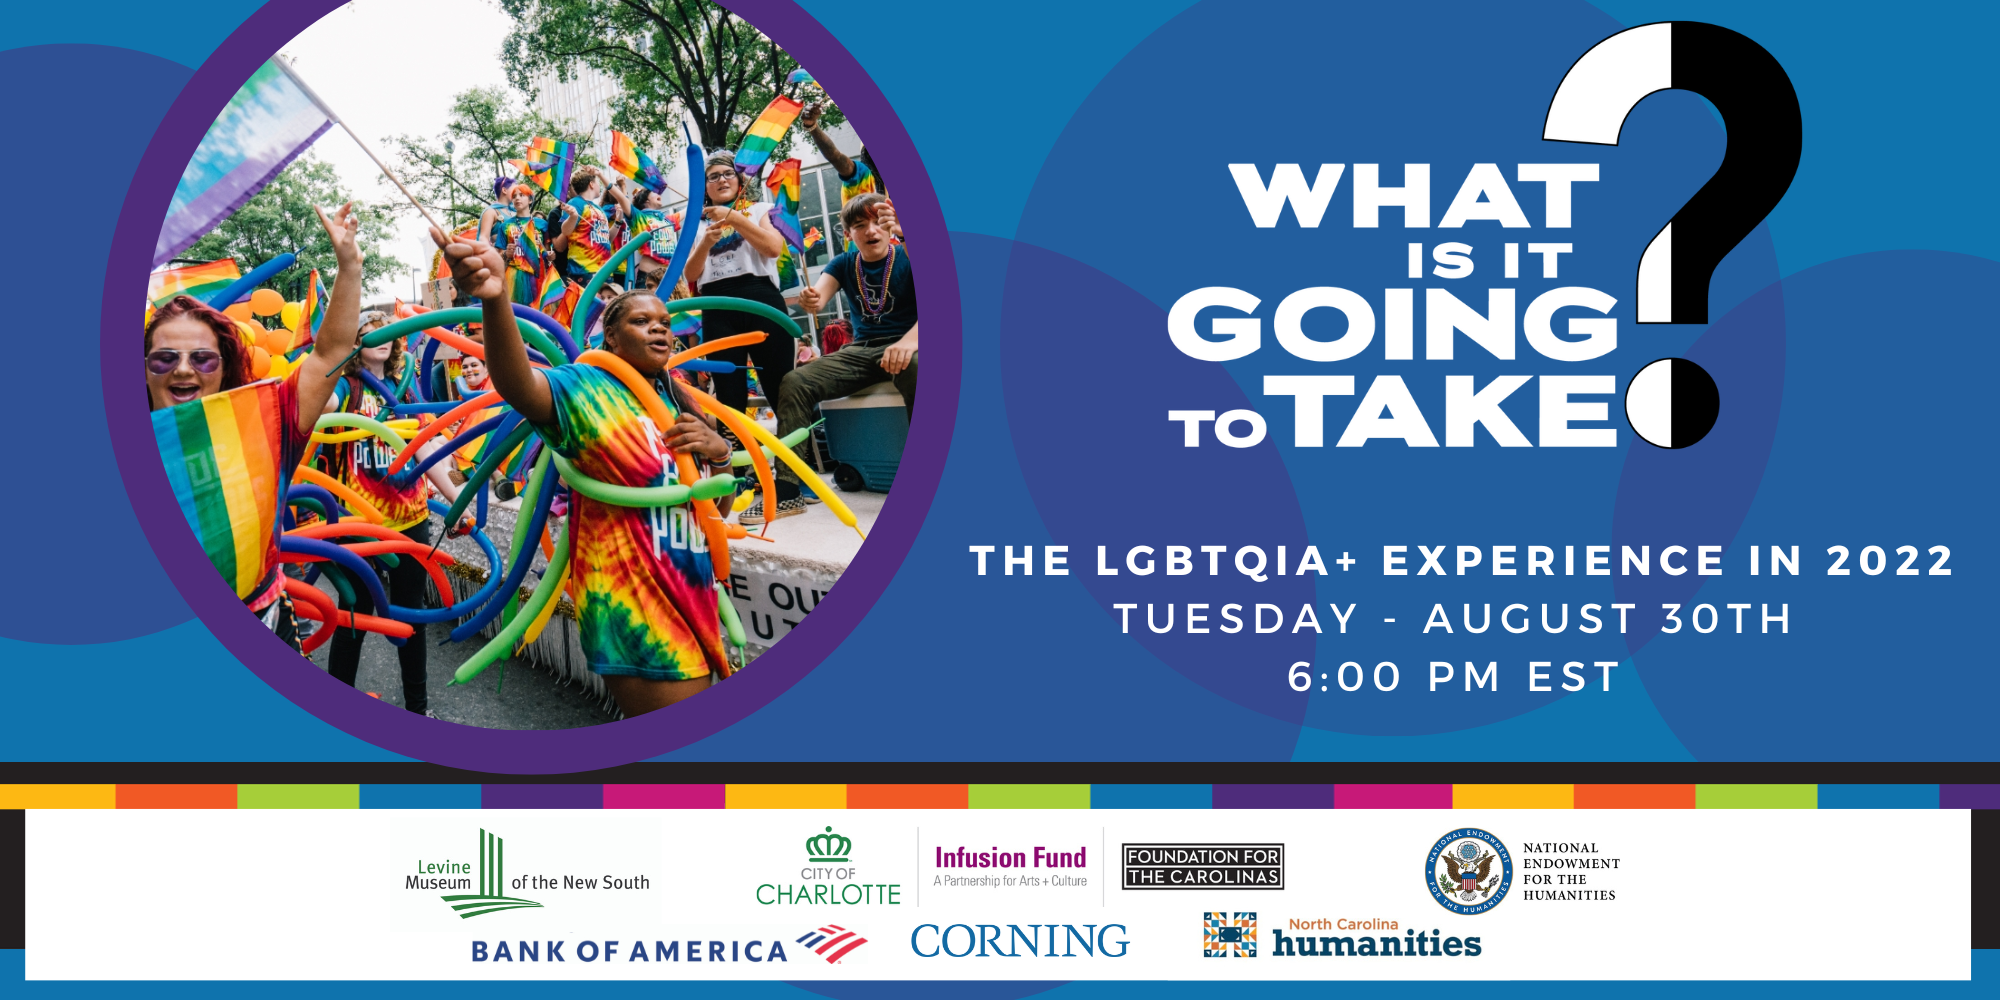 Levine Museum of the New South What Is It Going To Take? The LGBTQIA+ Experience in 2022 Event Image